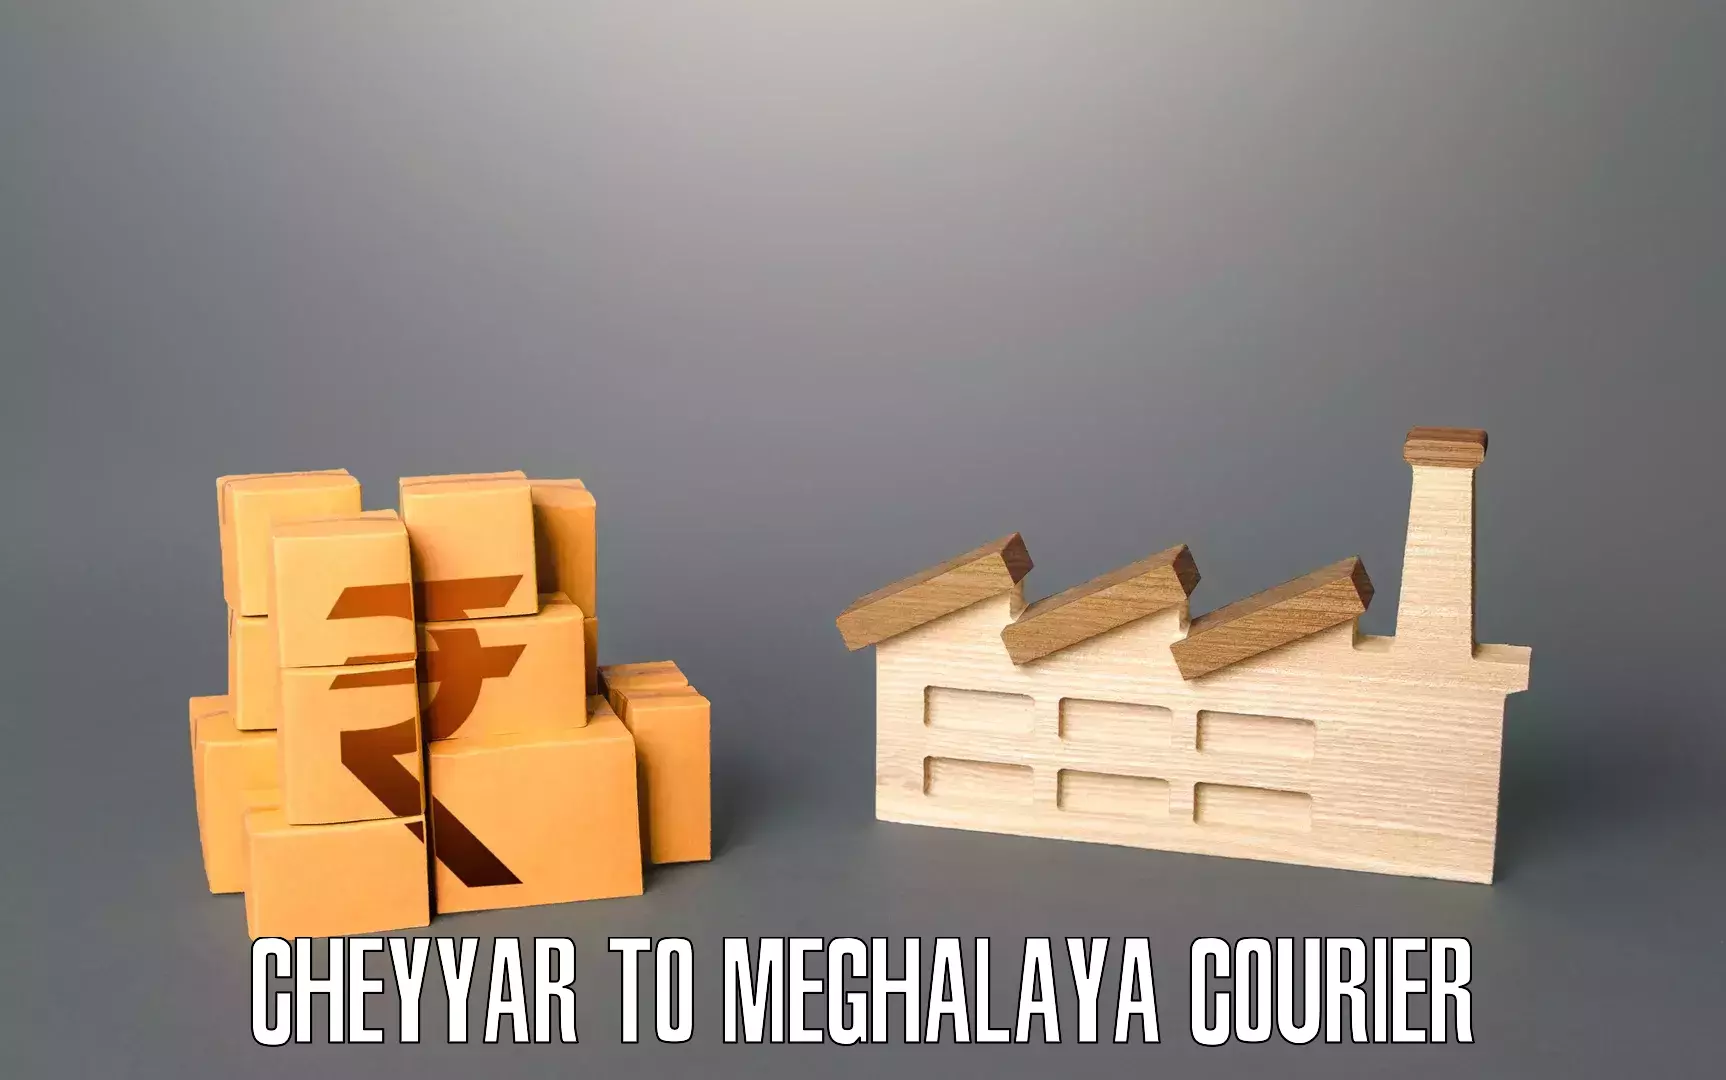 Furniture delivery service Cheyyar to Meghalaya